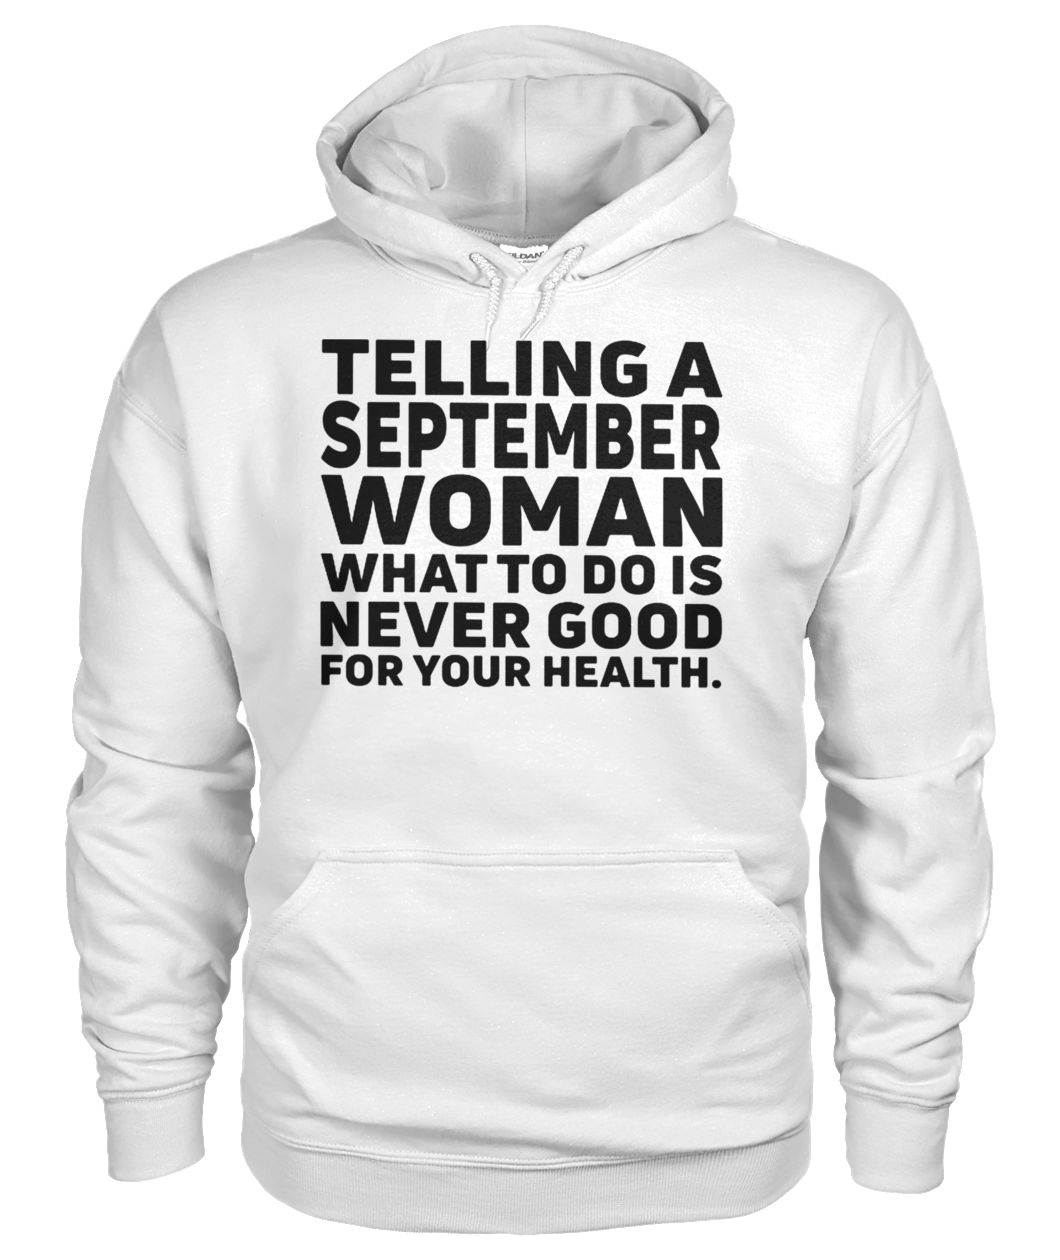 Telling a september woman what to do is never good for your health gildan hoodie